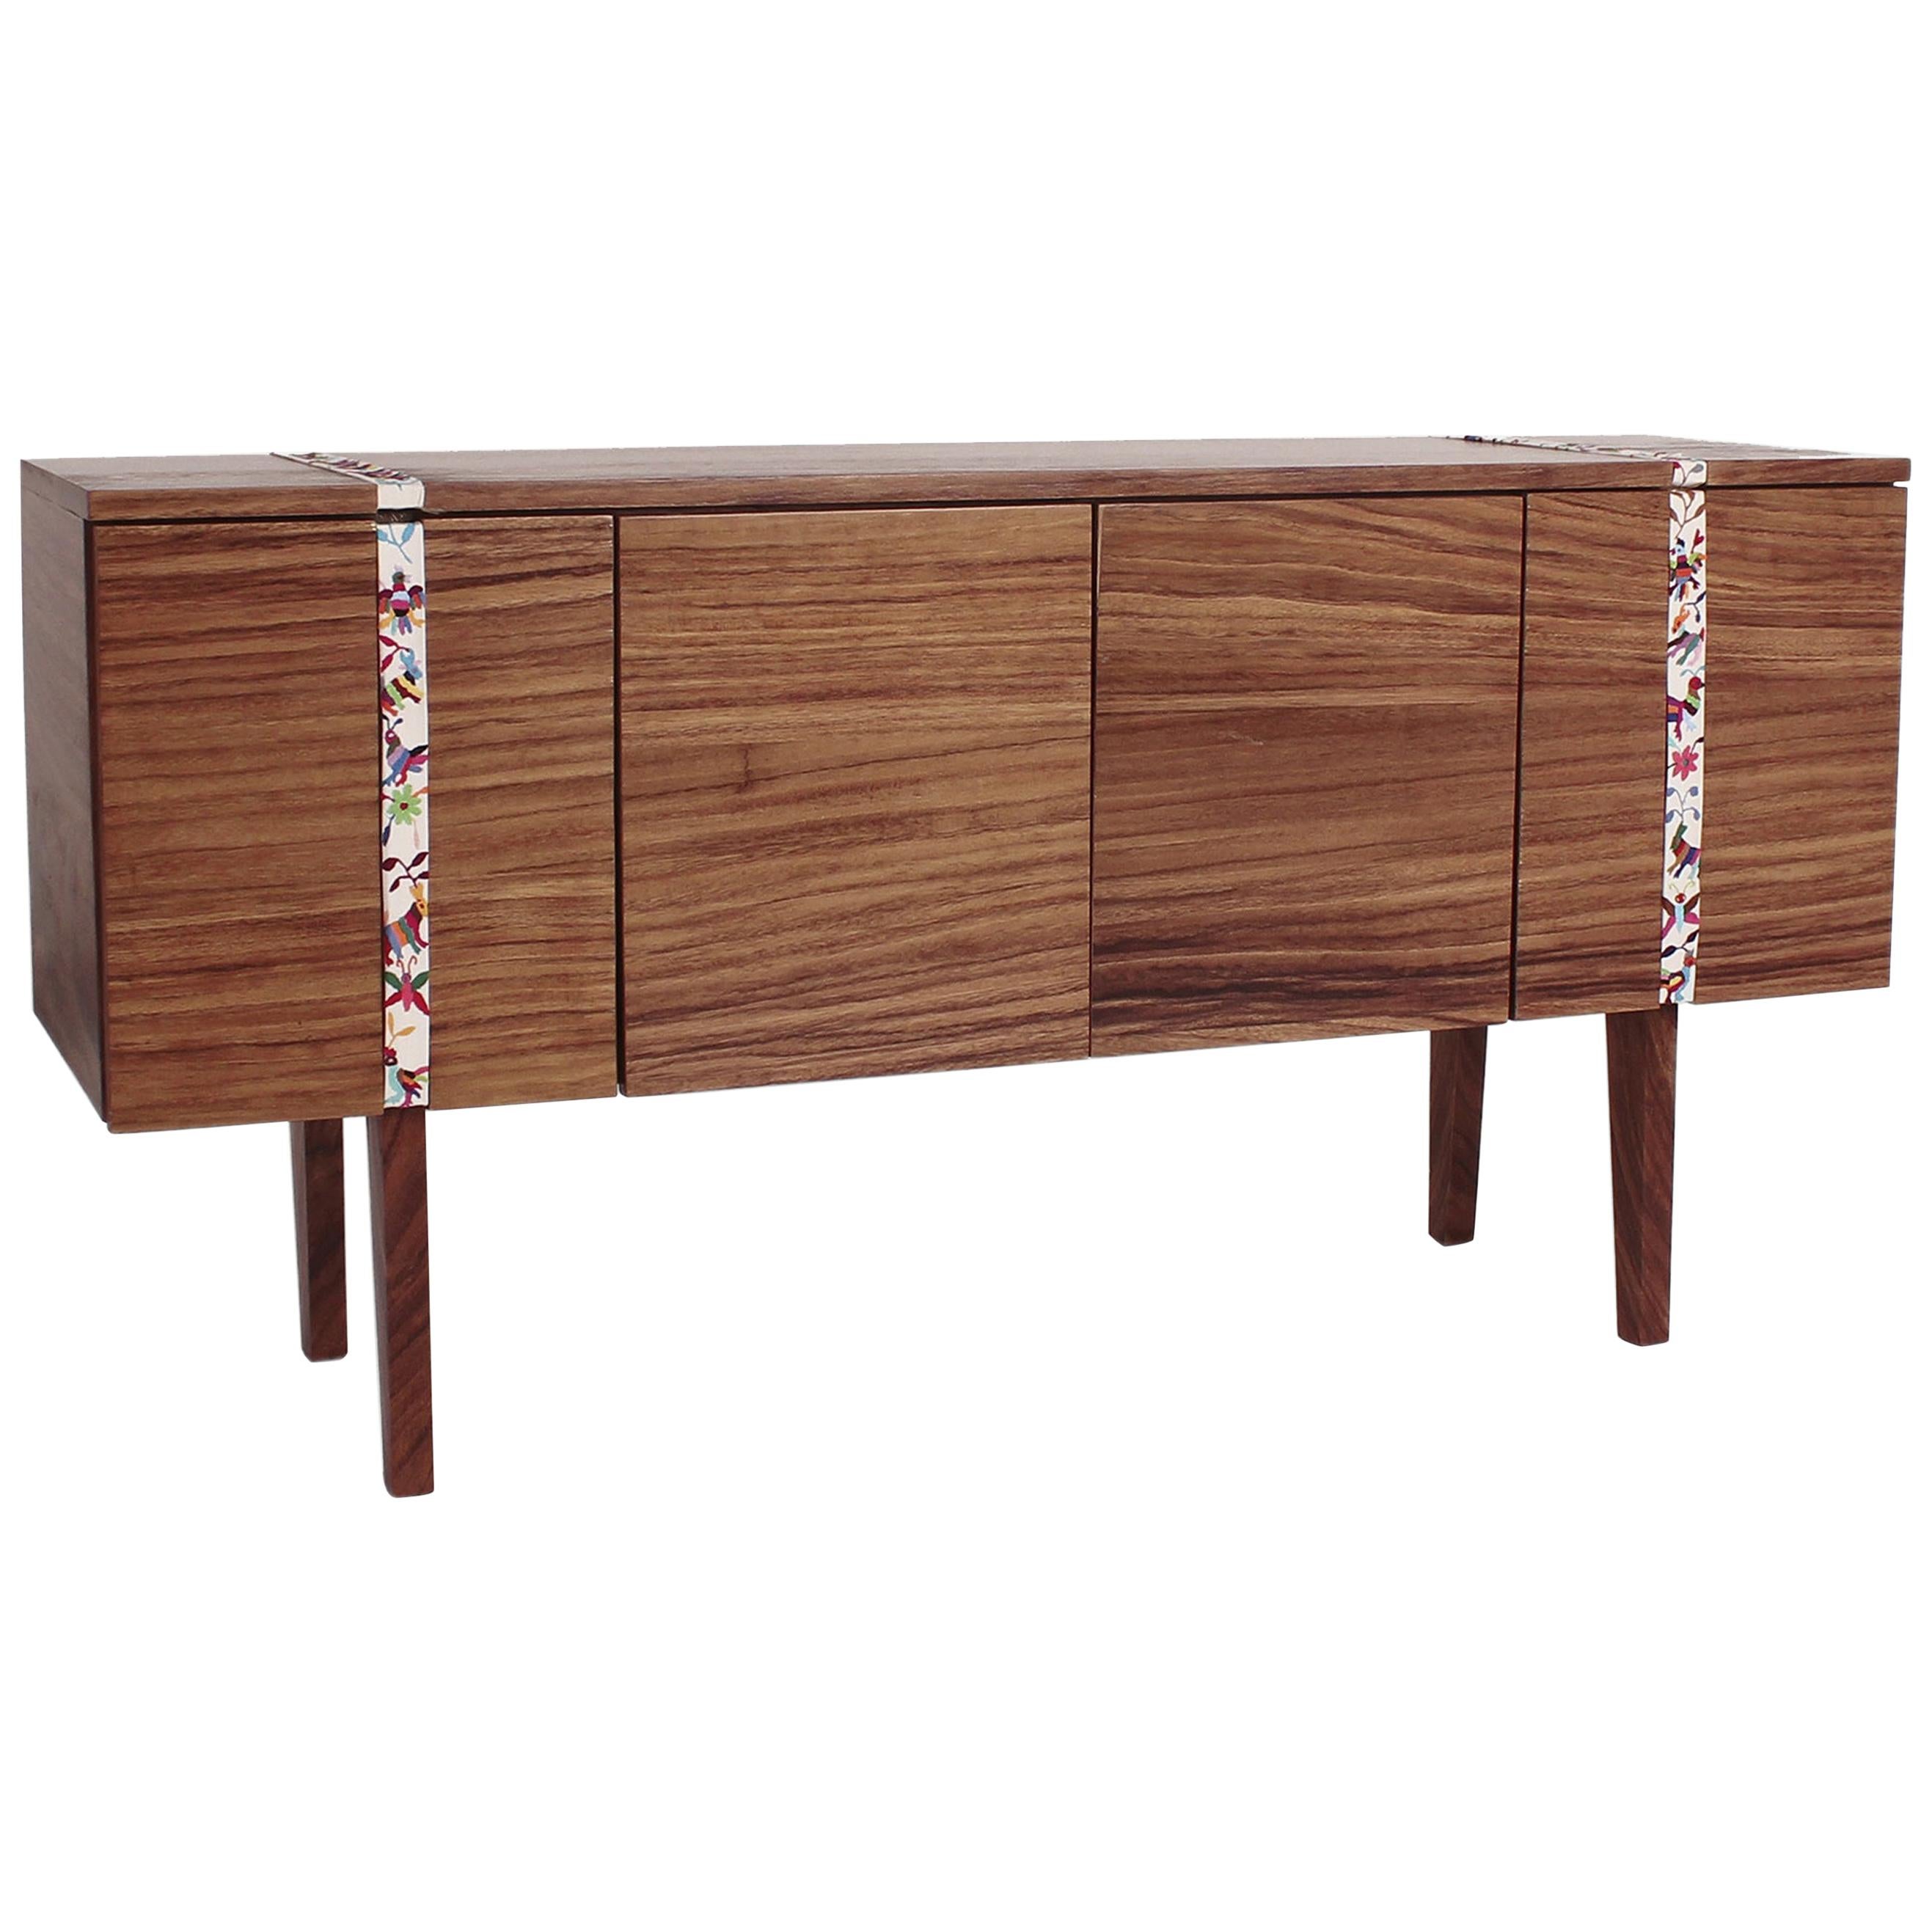 Sideboard in Parota Wood with Handmade Embroidery Detail For Sale